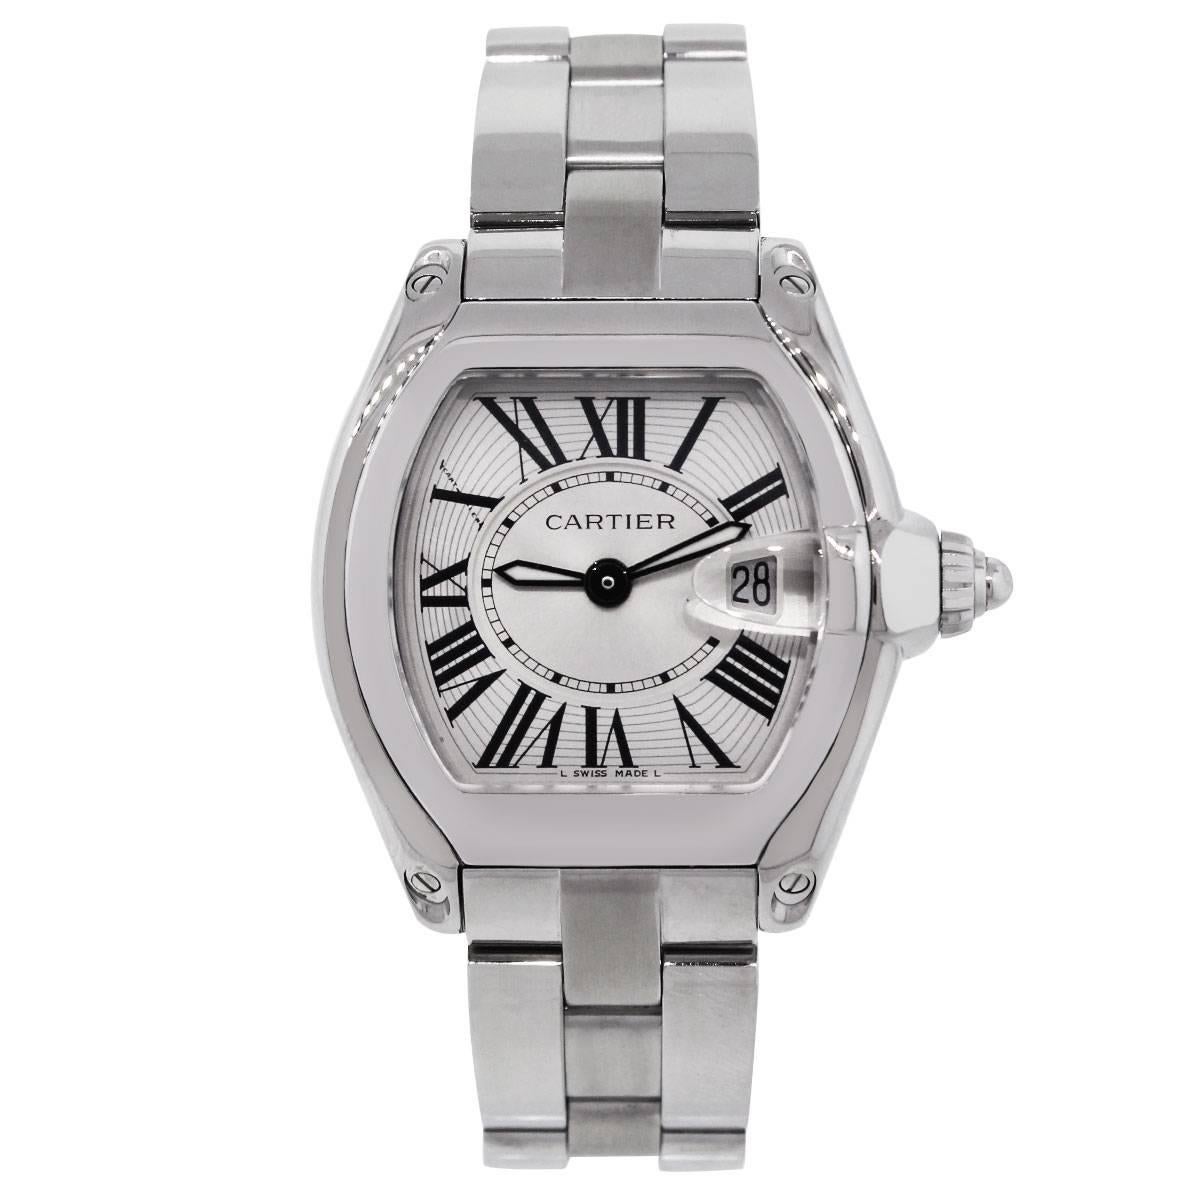 Brand: Cartier
MPN: 2675
Model: Roadster
Case Material: Stainless Steel
Case Diameter: 31mm
Crystal: Scratch resistant sapphire
Bezel: Smooth fixed stainless steel bezel
Dial: Silver dial with date displayed at 3 o’ clock. Date, Hours, Minutes, and